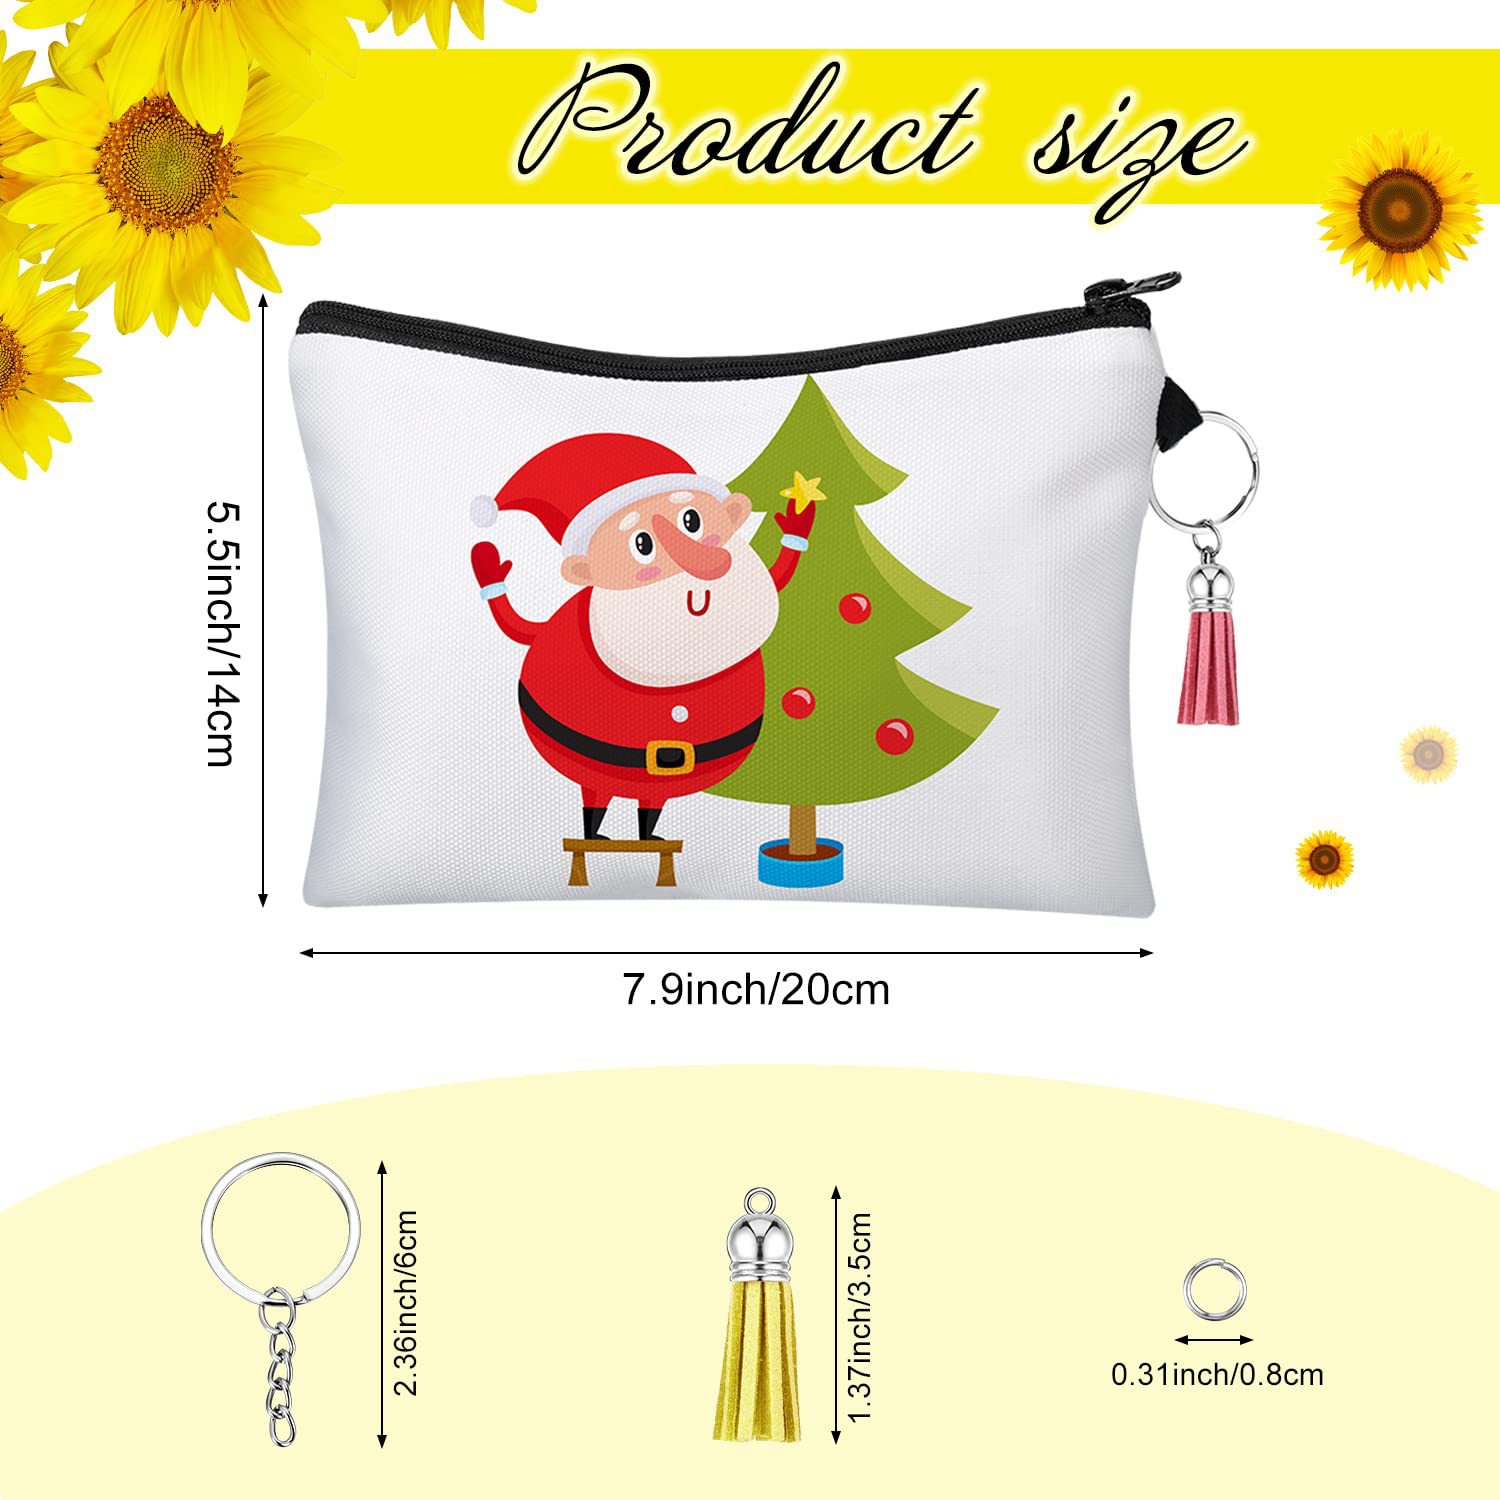 DHLSublimation Blank Cosmetic Bags Set Including DIY Heat Transfer Makeup Bags with Zipper, Keychains, Tassels, Jump Rings for DIY